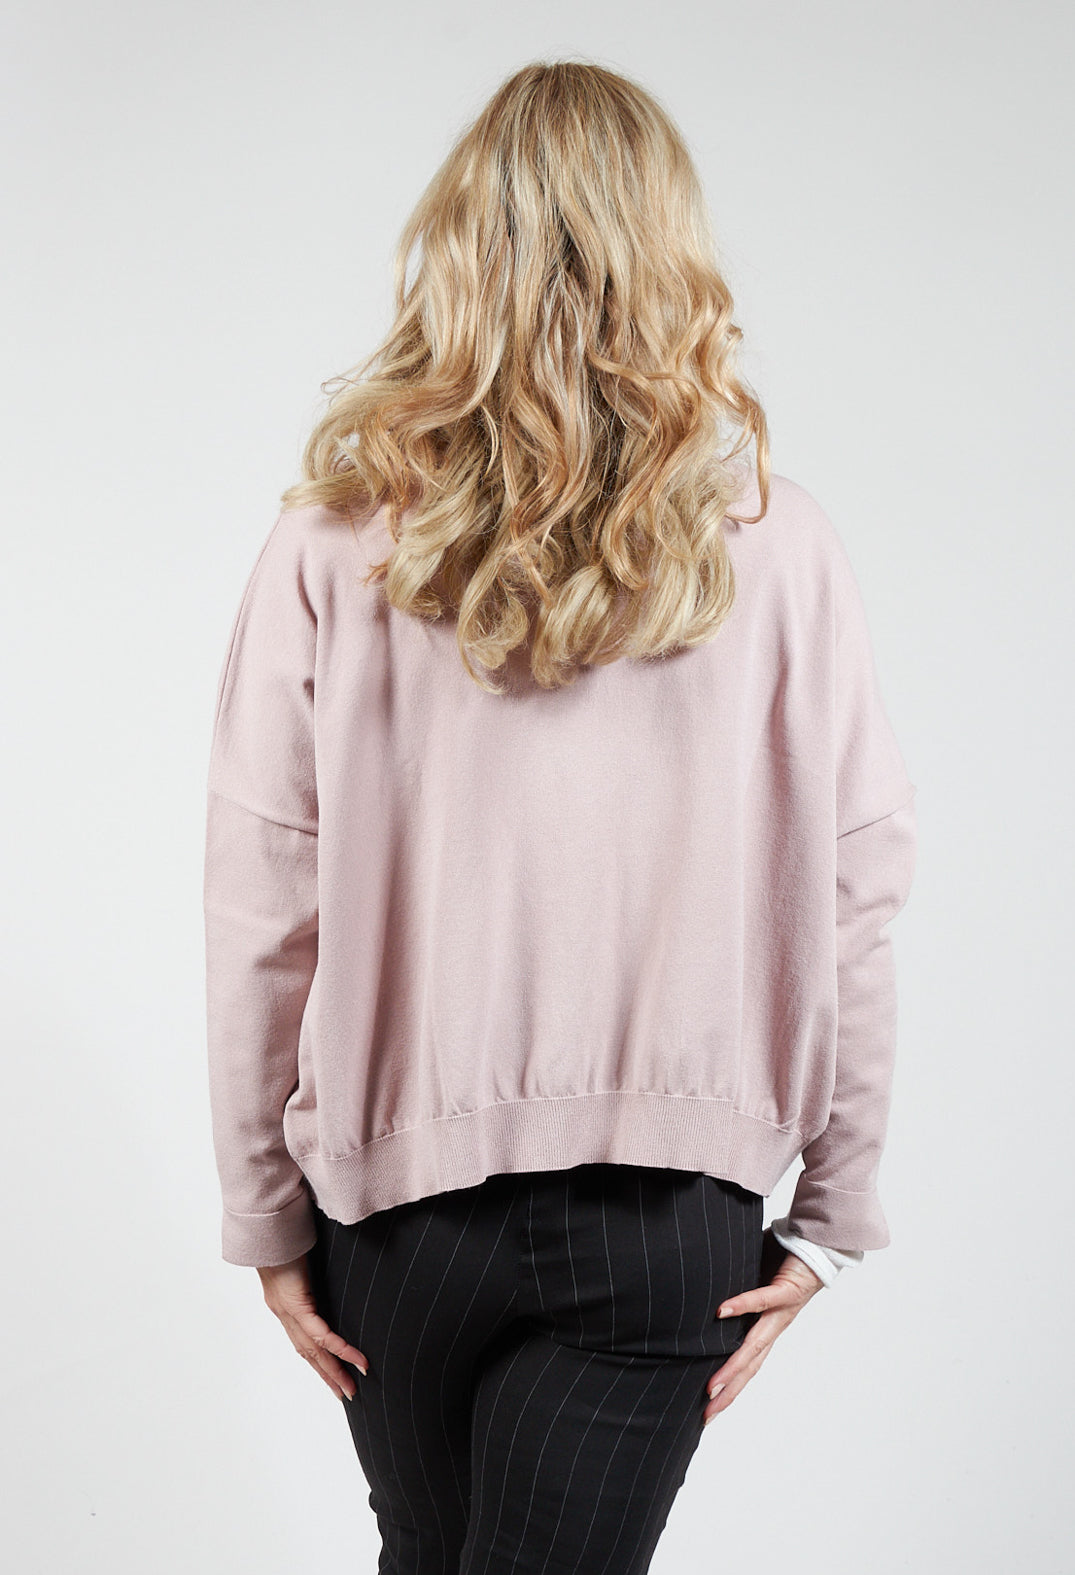 Collared Cardigan in Dusky Pink